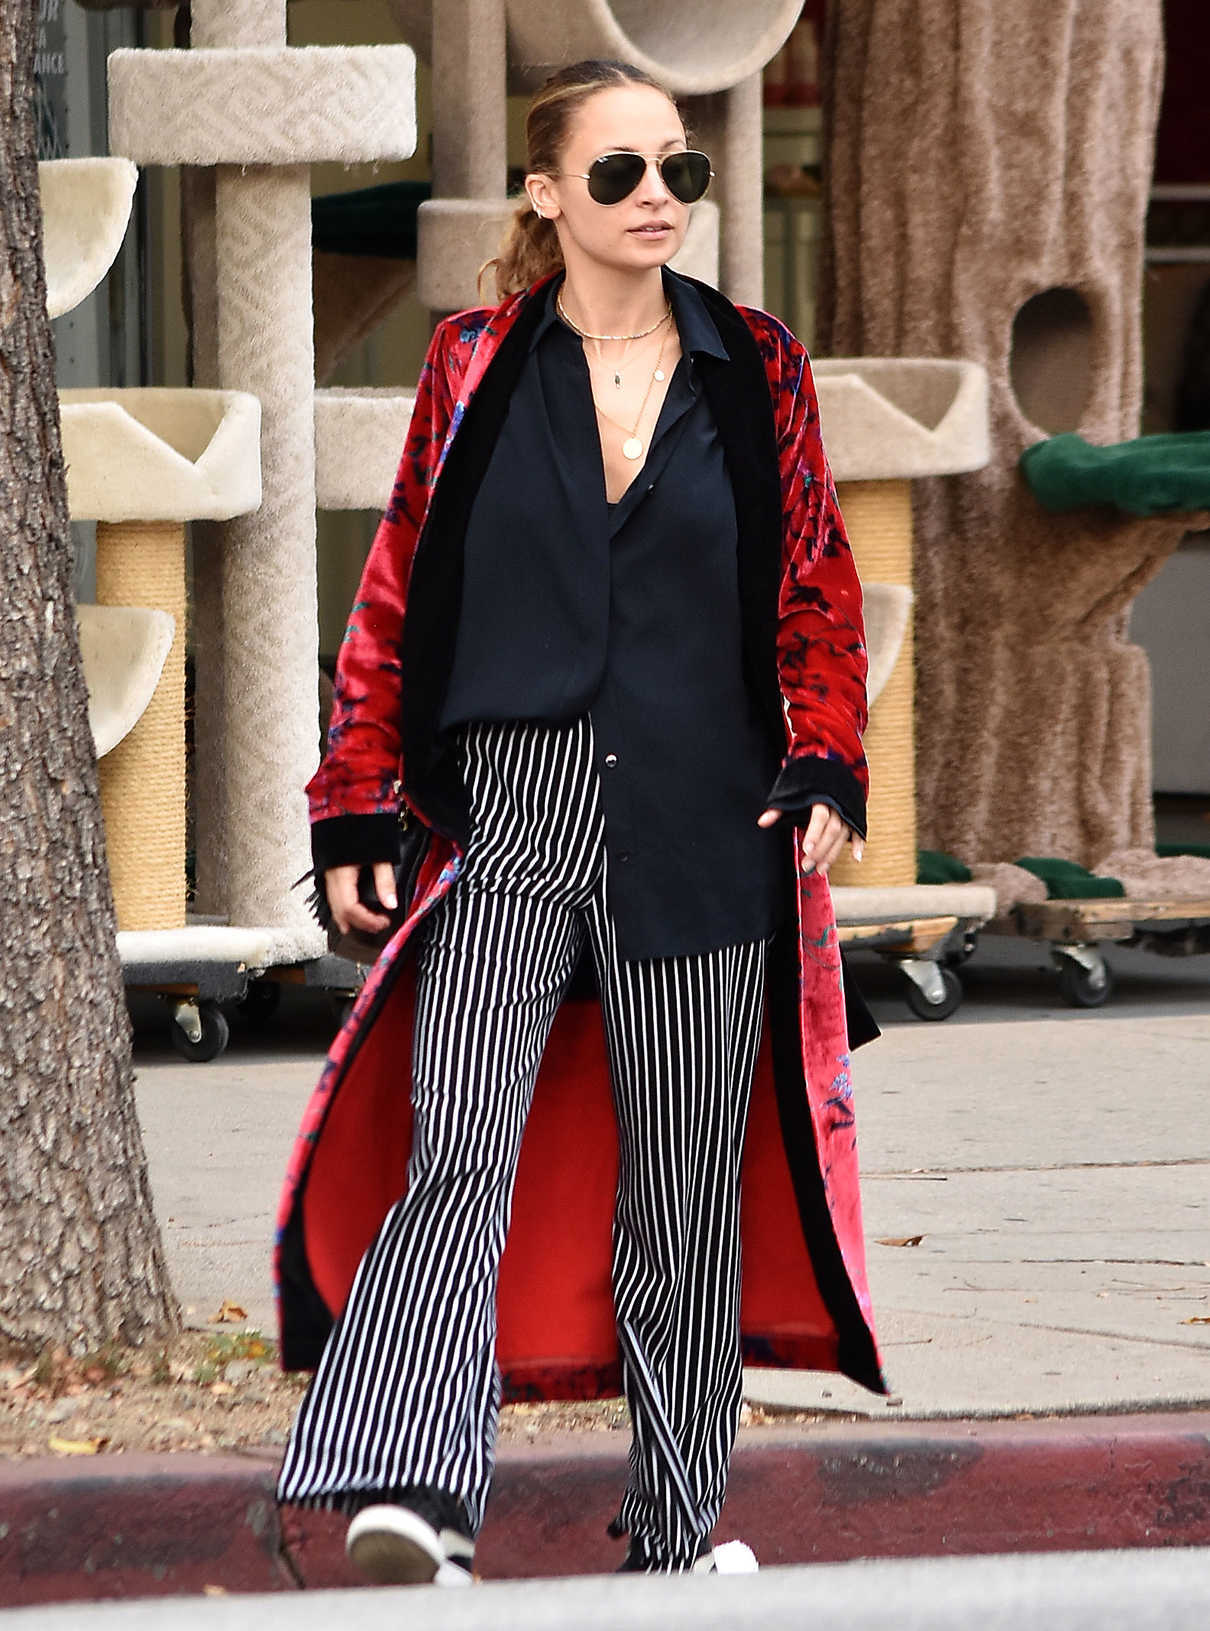 Nicole Richie in a Red Floral Cardigan